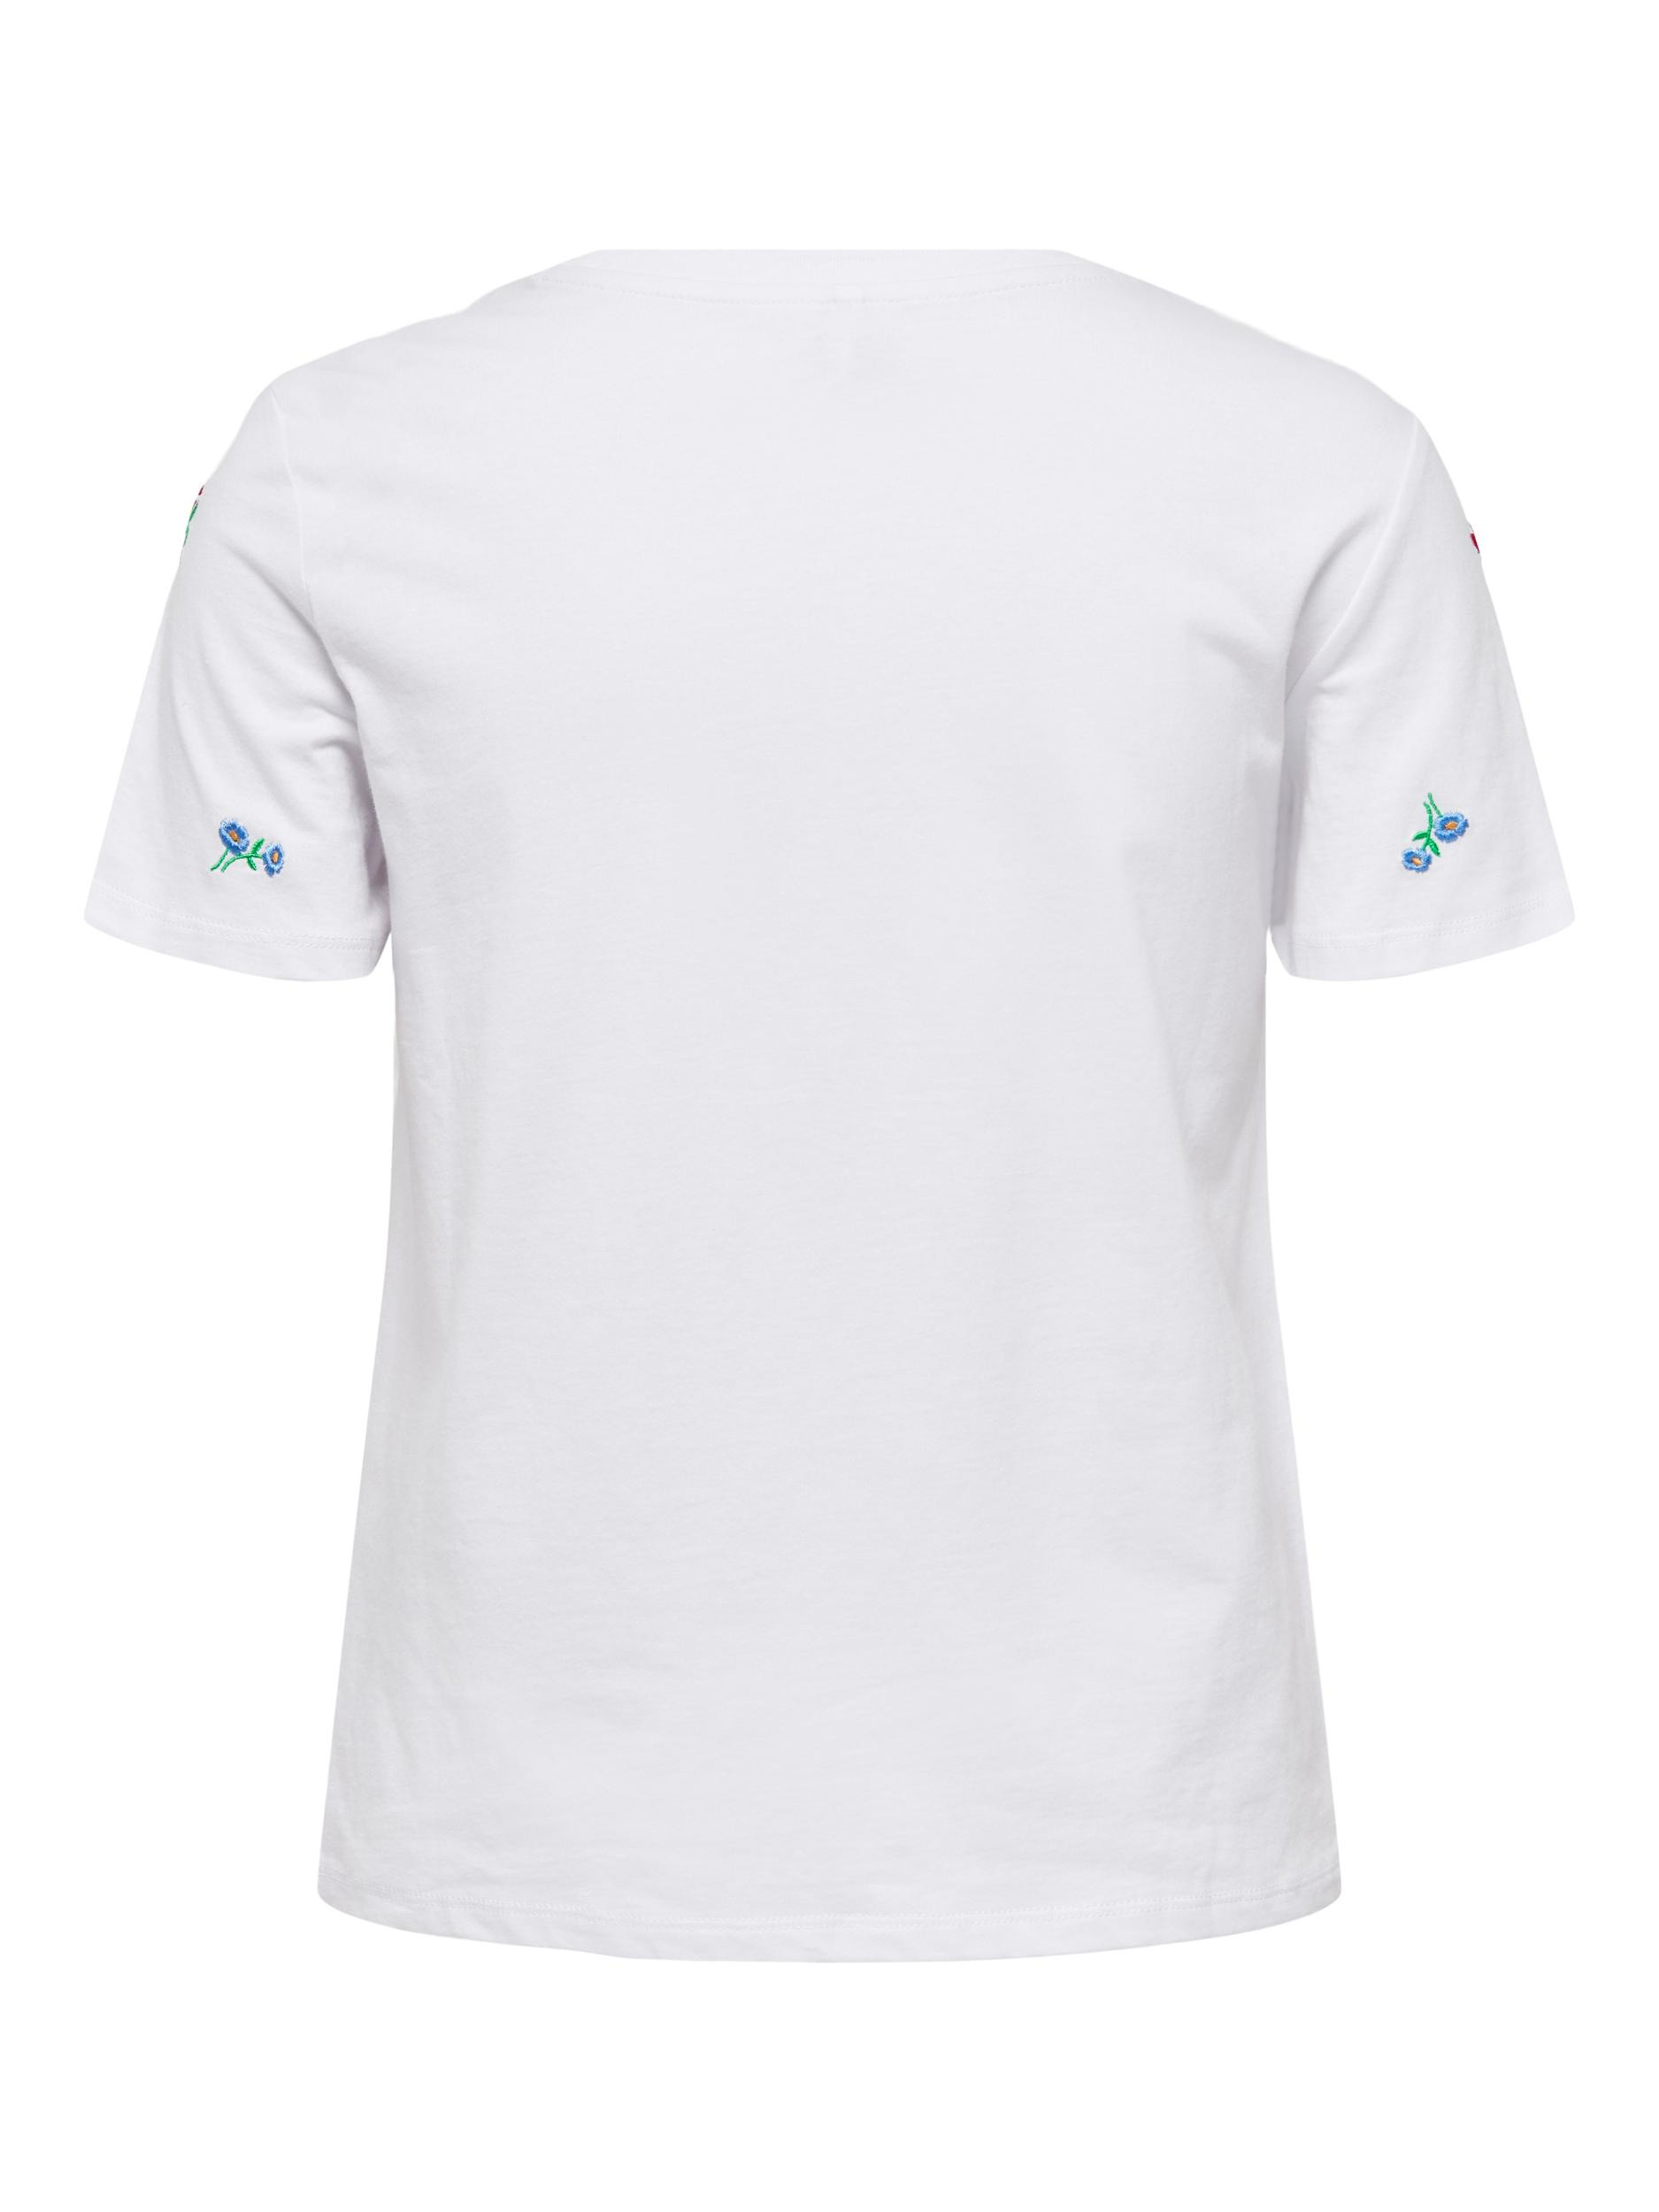 Only - Regular fit T-shirt with print, White 1, large image number 1